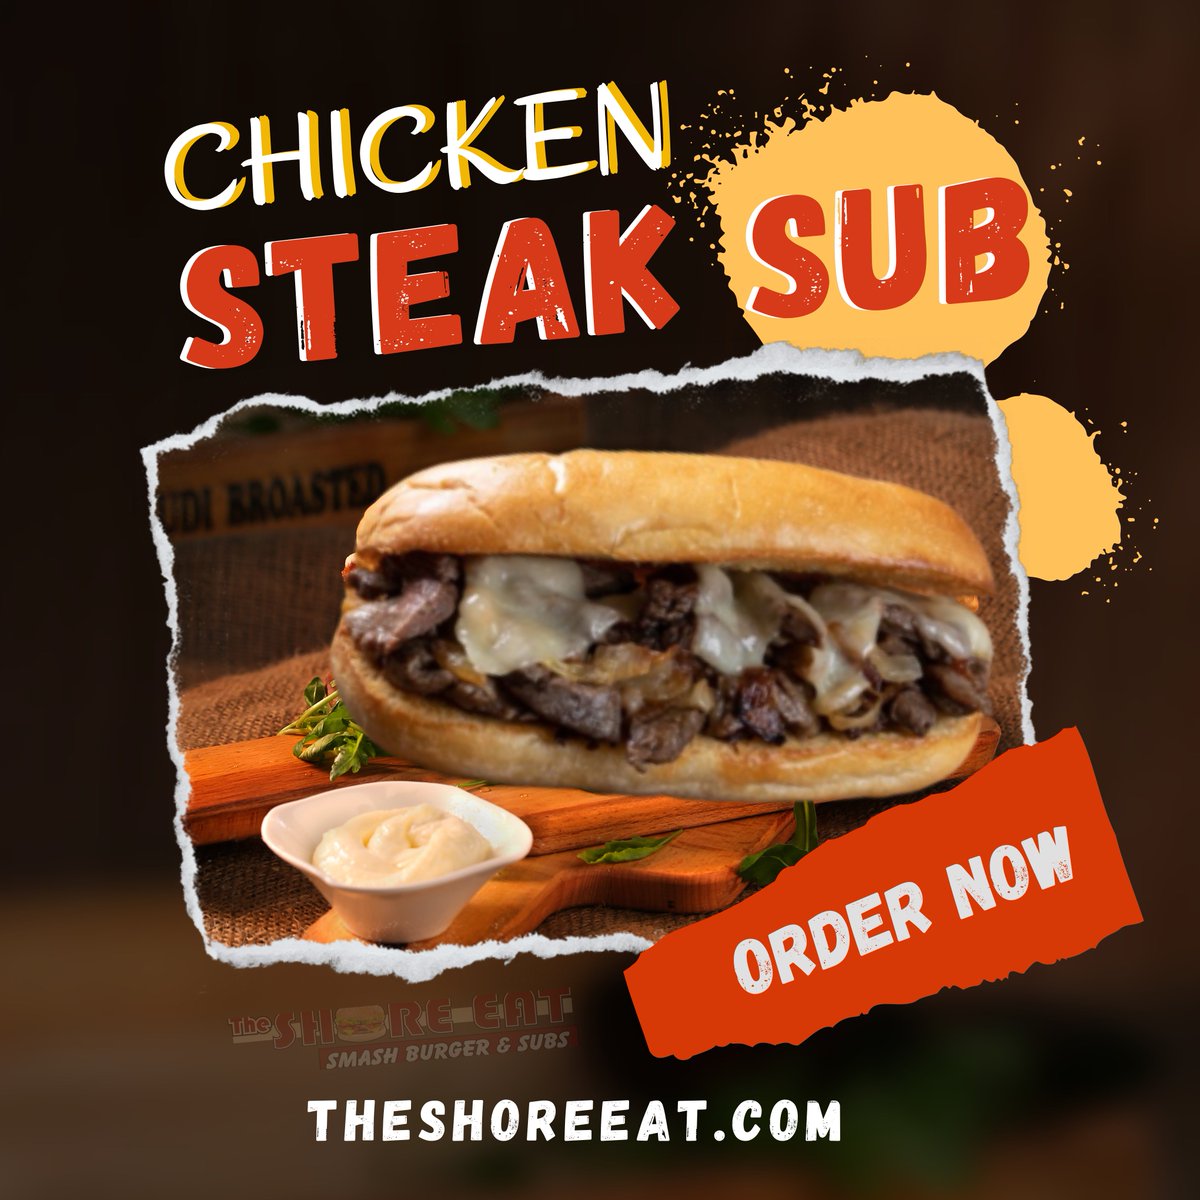 Indulge in savory delight with our Chicken Steak Sub! Bursting with succulent grilled chicken, fresh veggies, and tangy sauces, it's a flavor-packed experience you won't want to miss. Bite into bliss today🍗#ChickenSteakSub #DeliciousEats
👉𝐖𝐞𝐛𝐬𝐢𝐭𝐞: theshoreeat.com